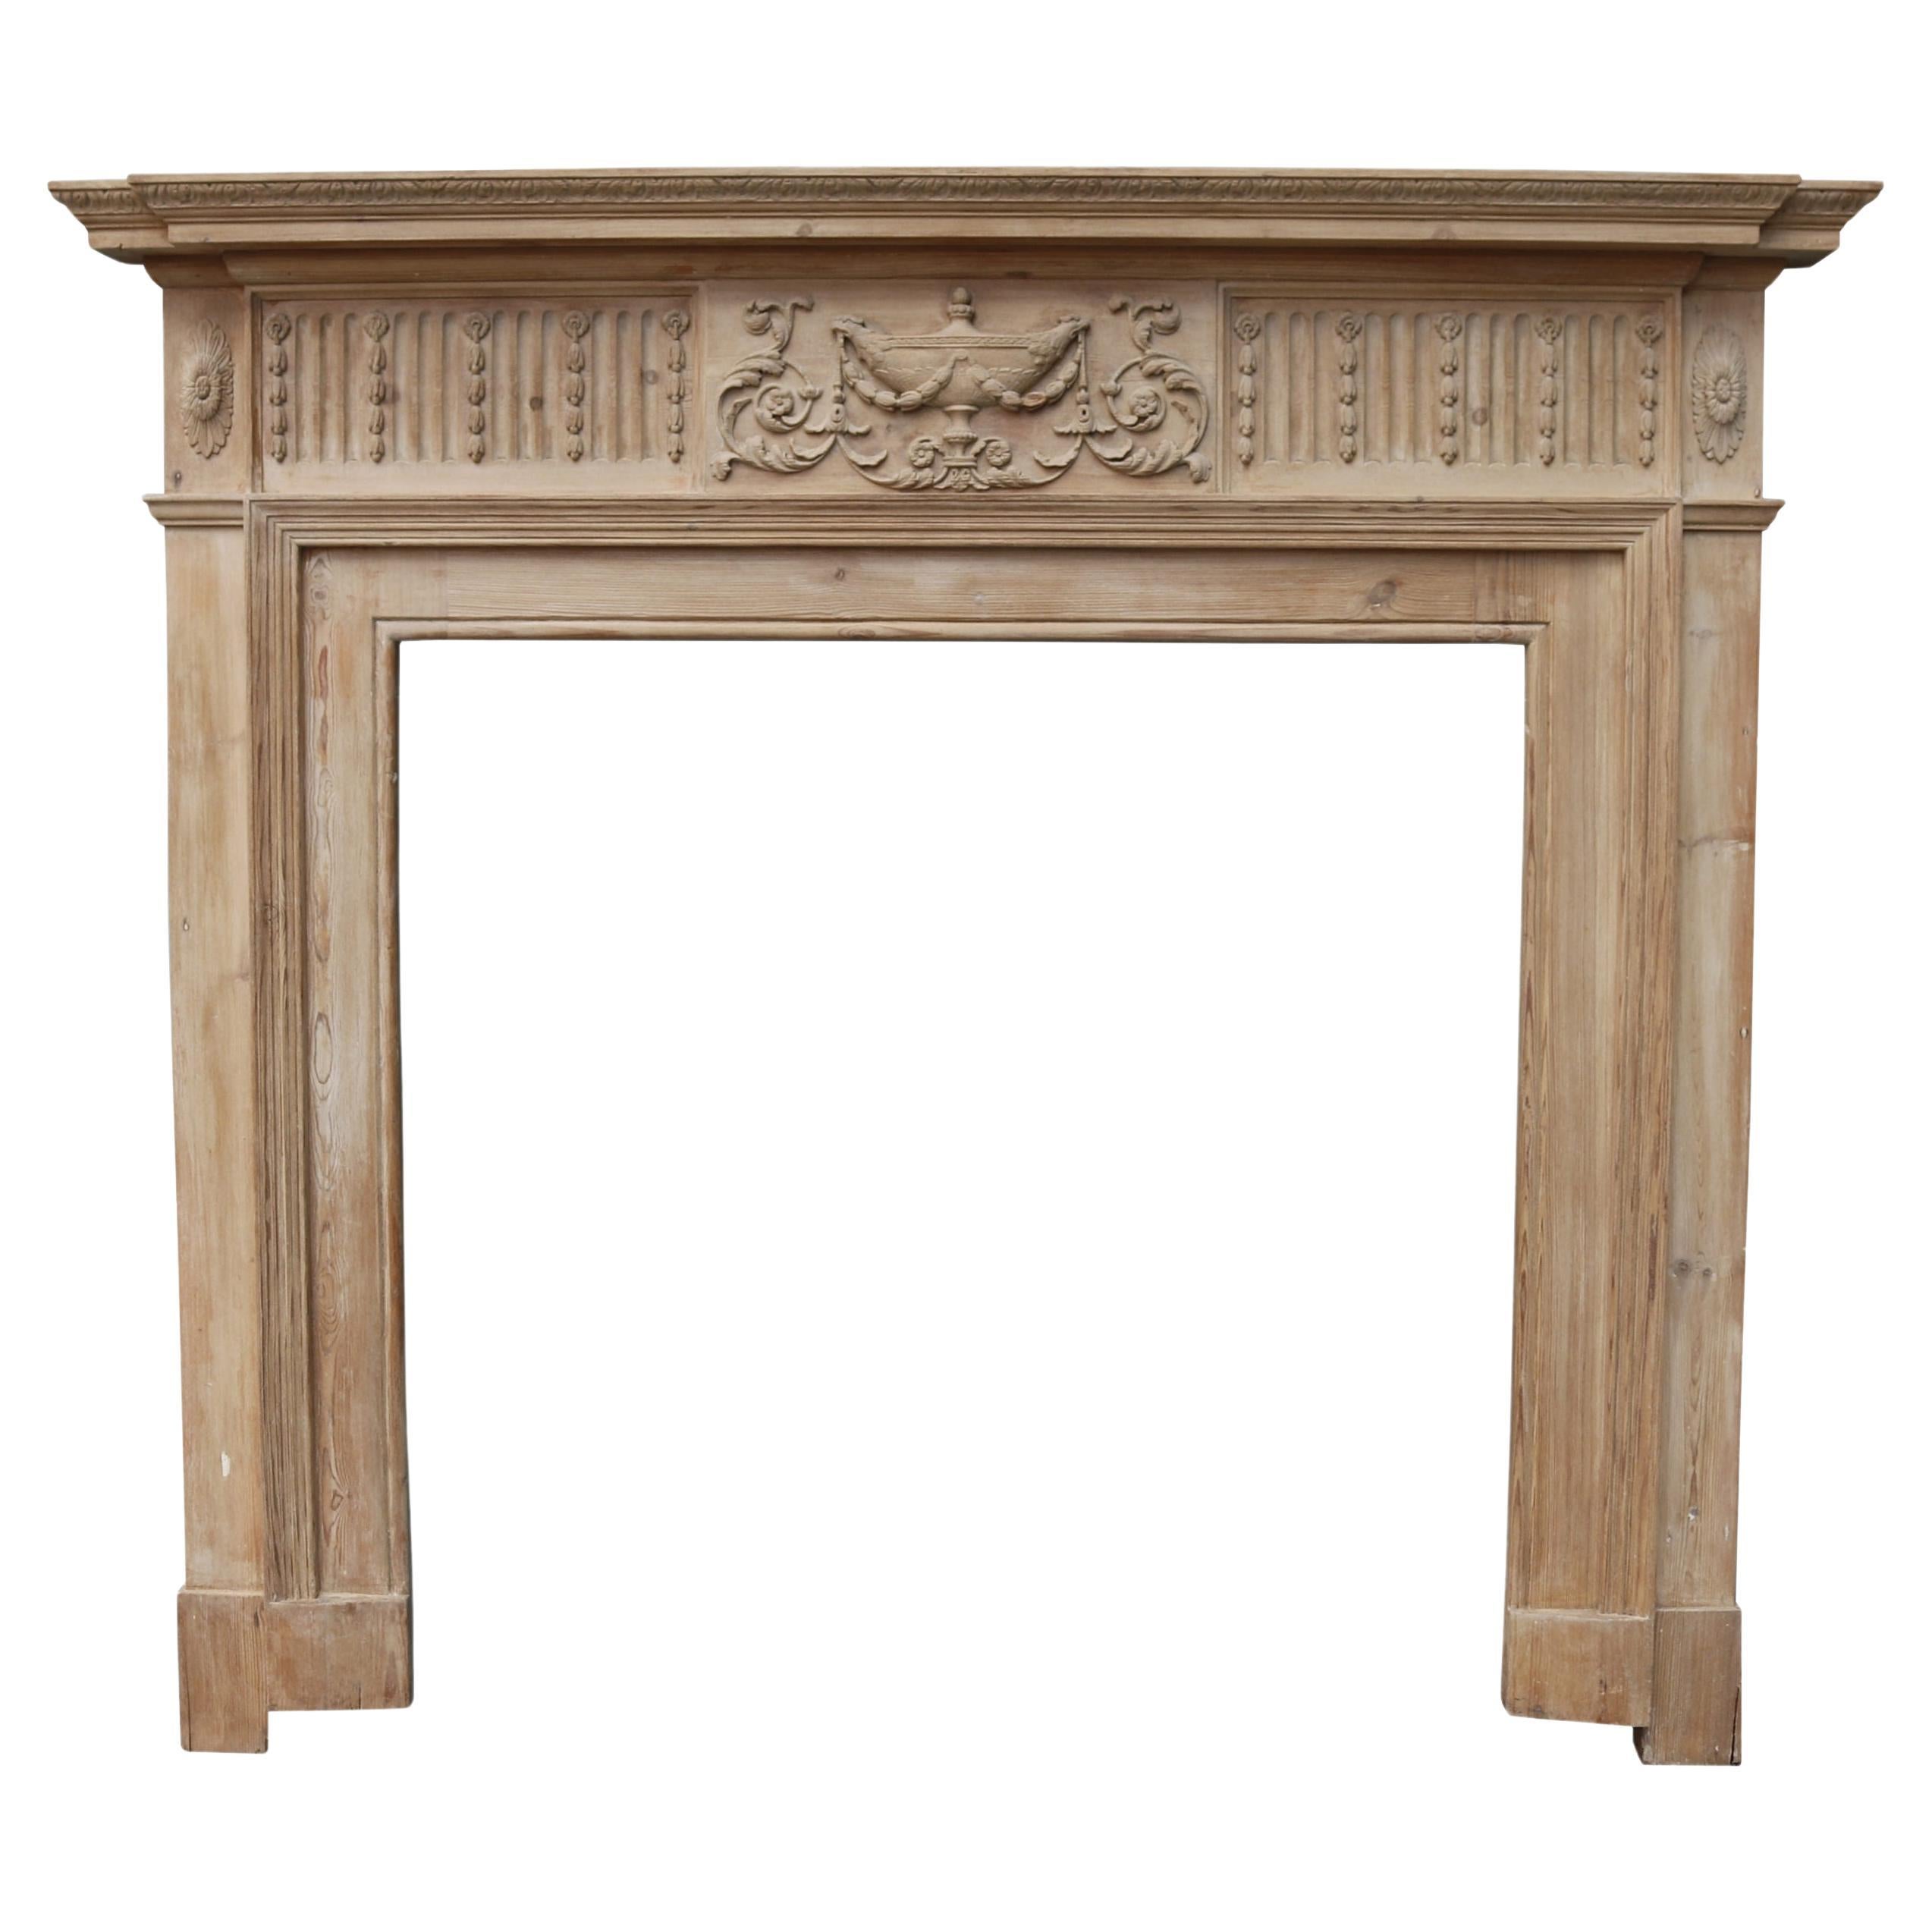 Antique Neoclassical Style Carved Fire Mantel For Sale